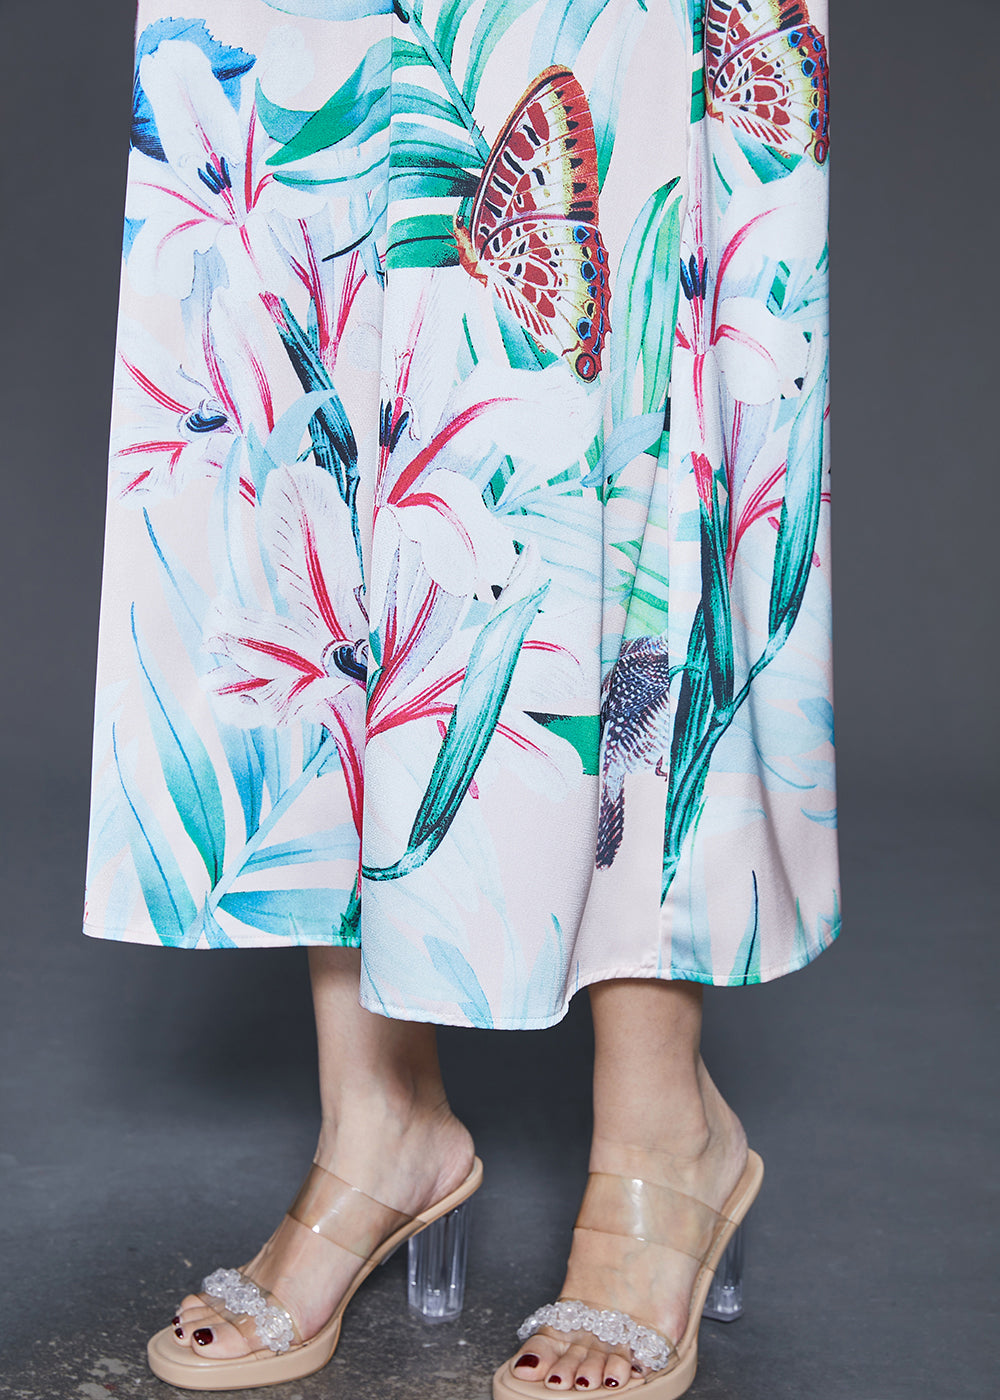 Boutique White Oversized Print Silk Vacation Dresses Summer